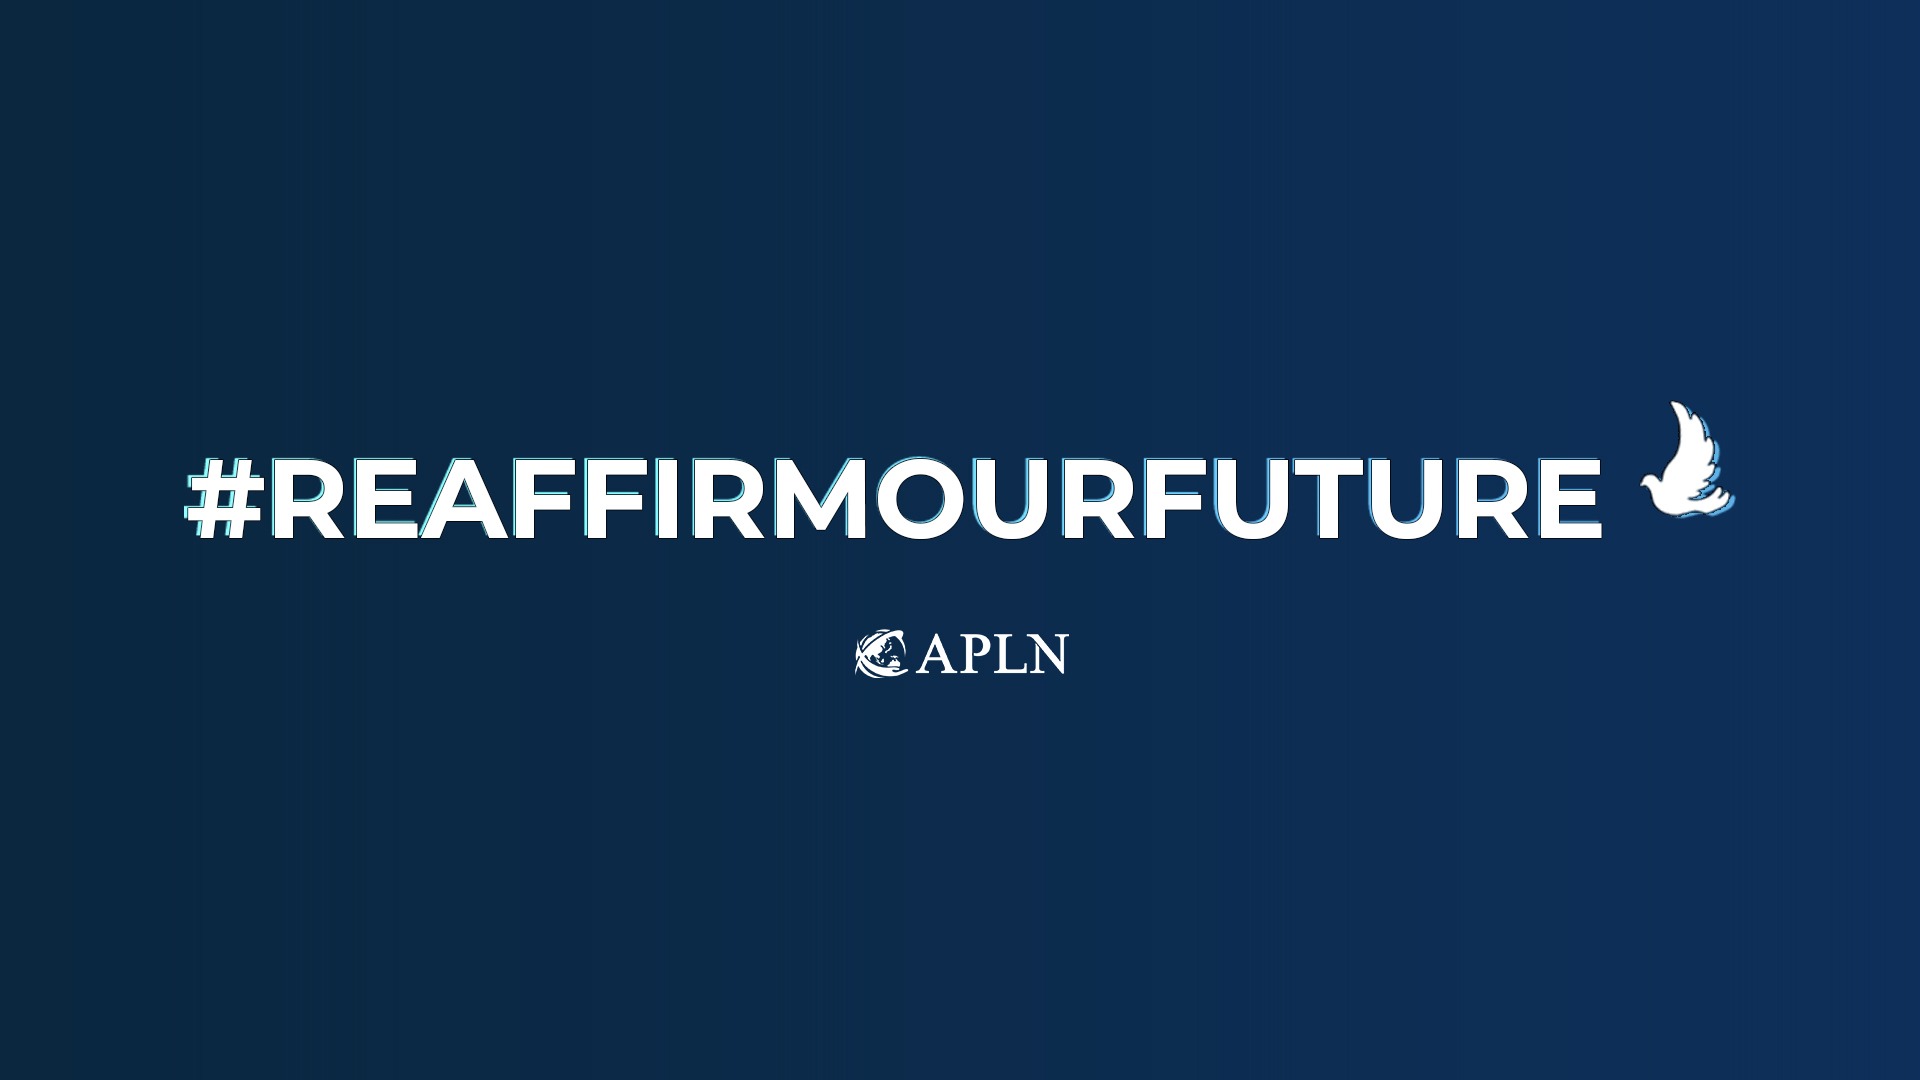 APLN urges P5 leaders to #ReaffirmOurFuture